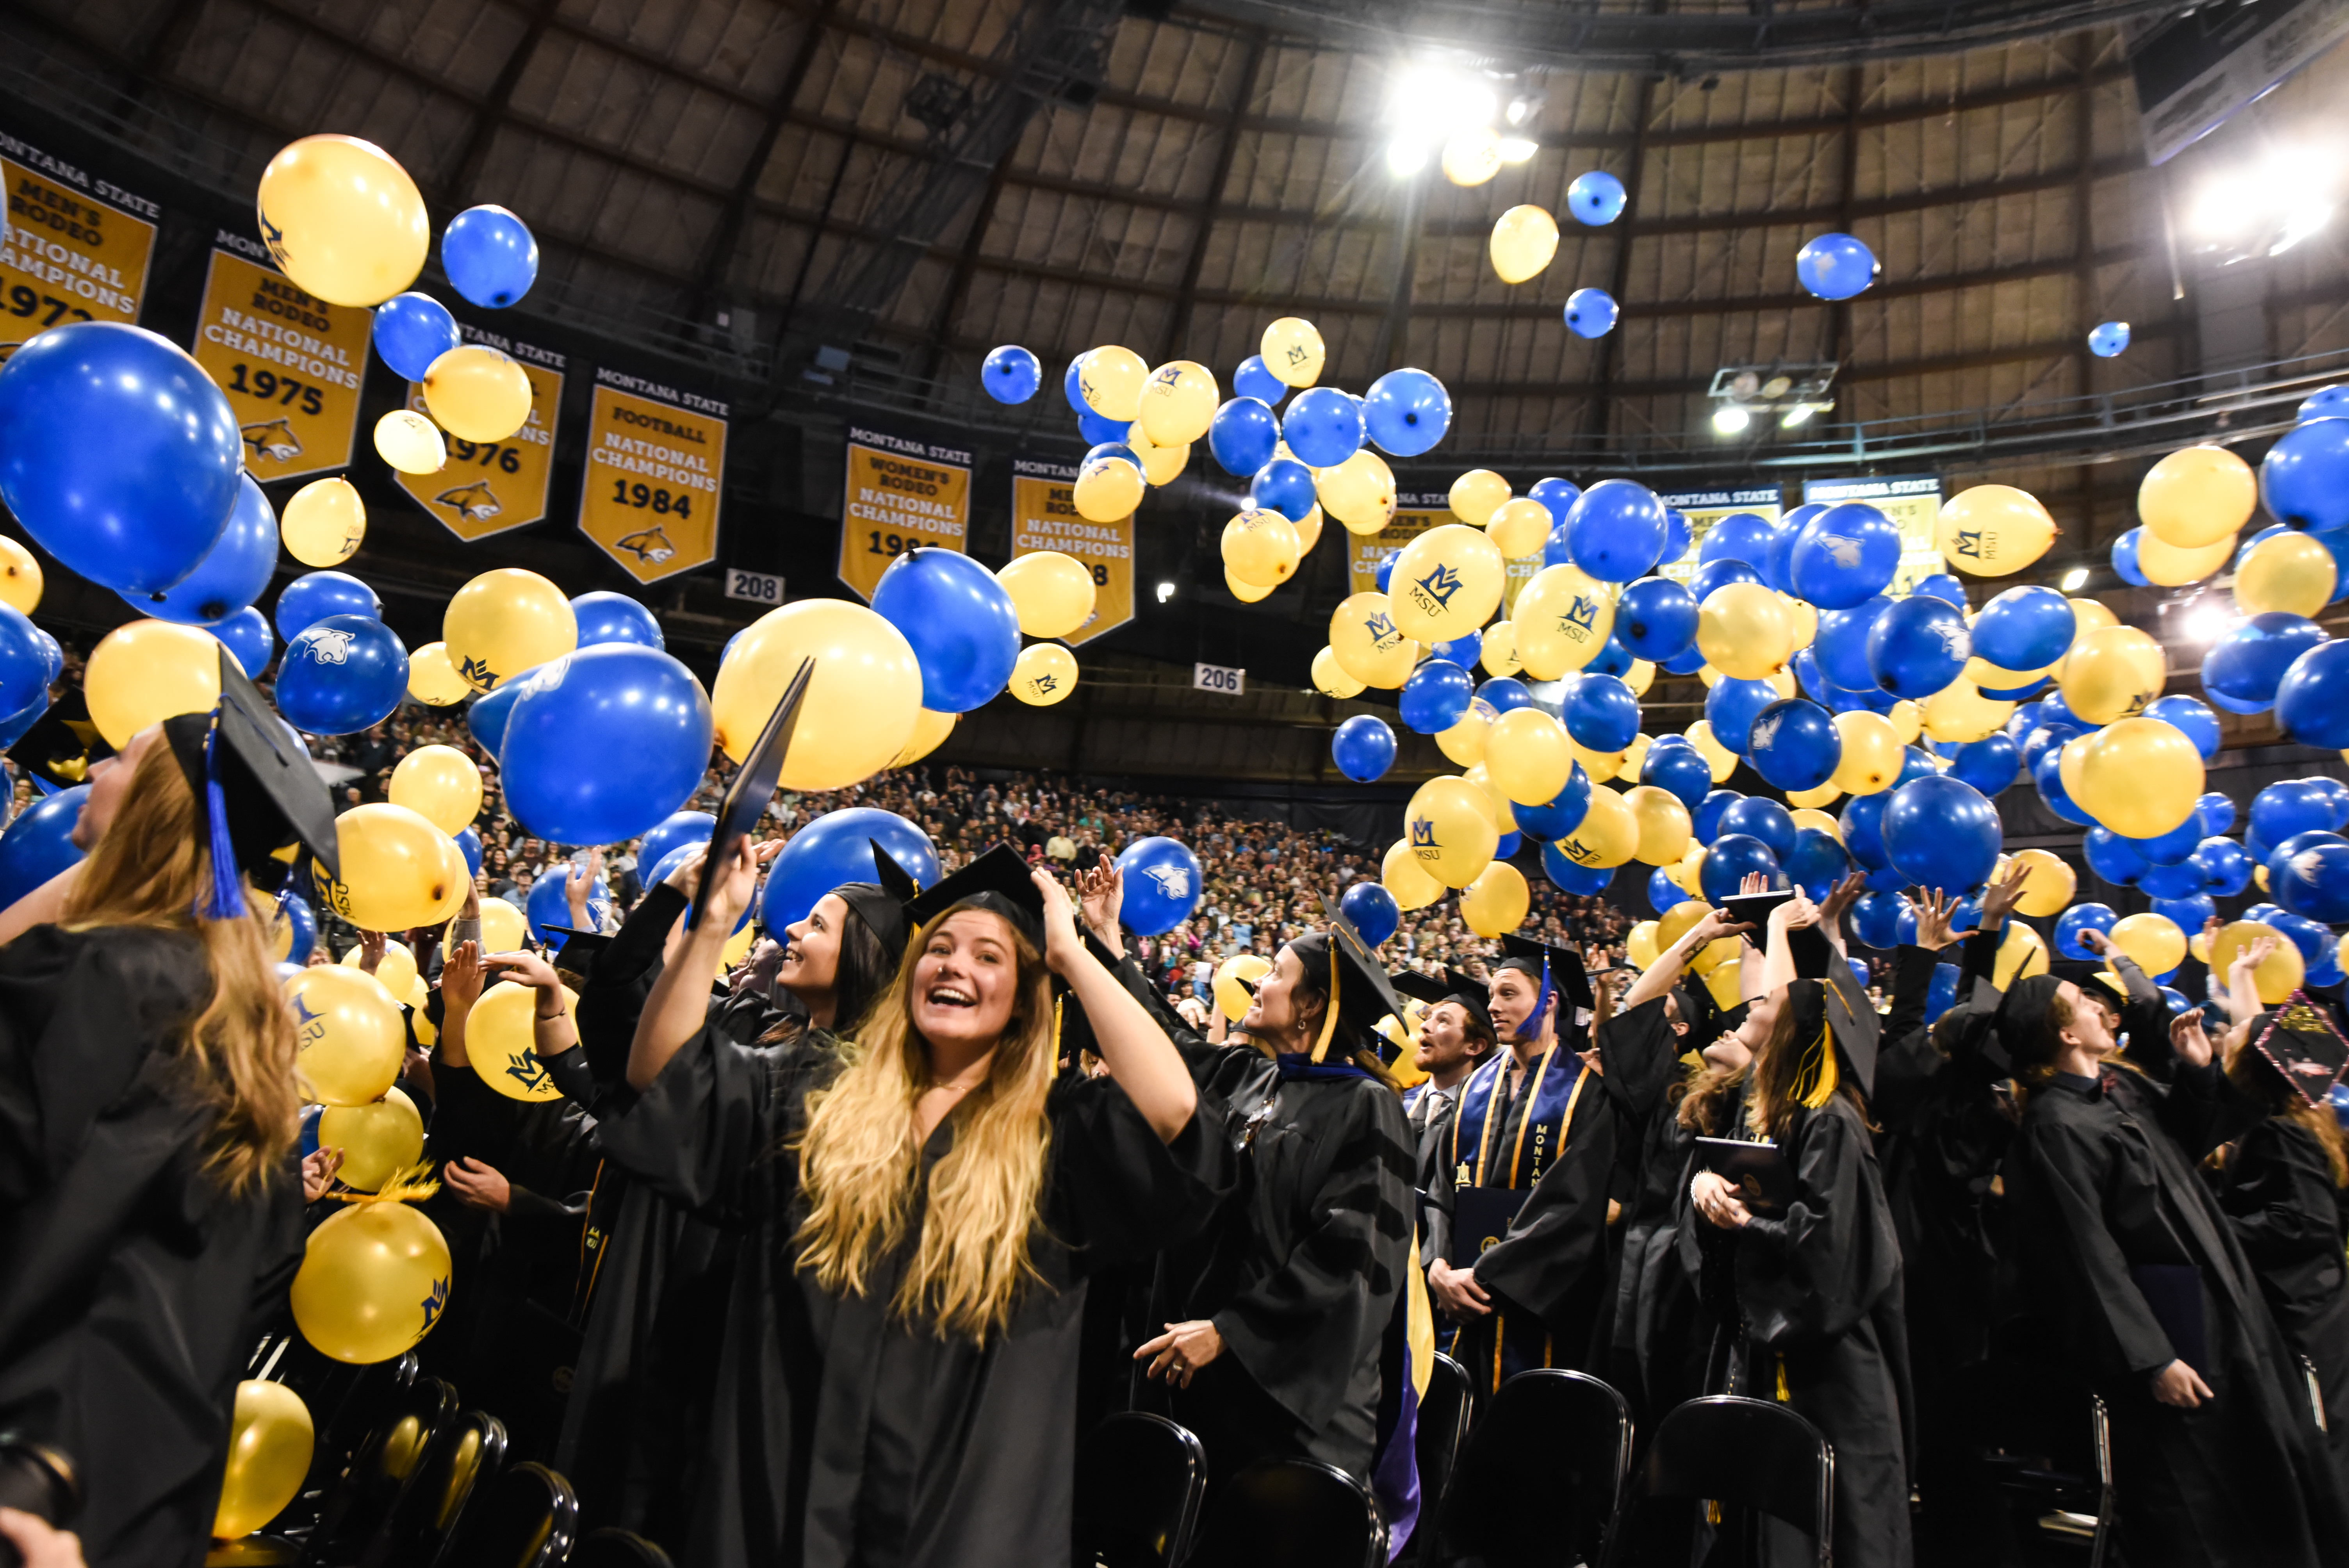 students in commencement regalia with balloons